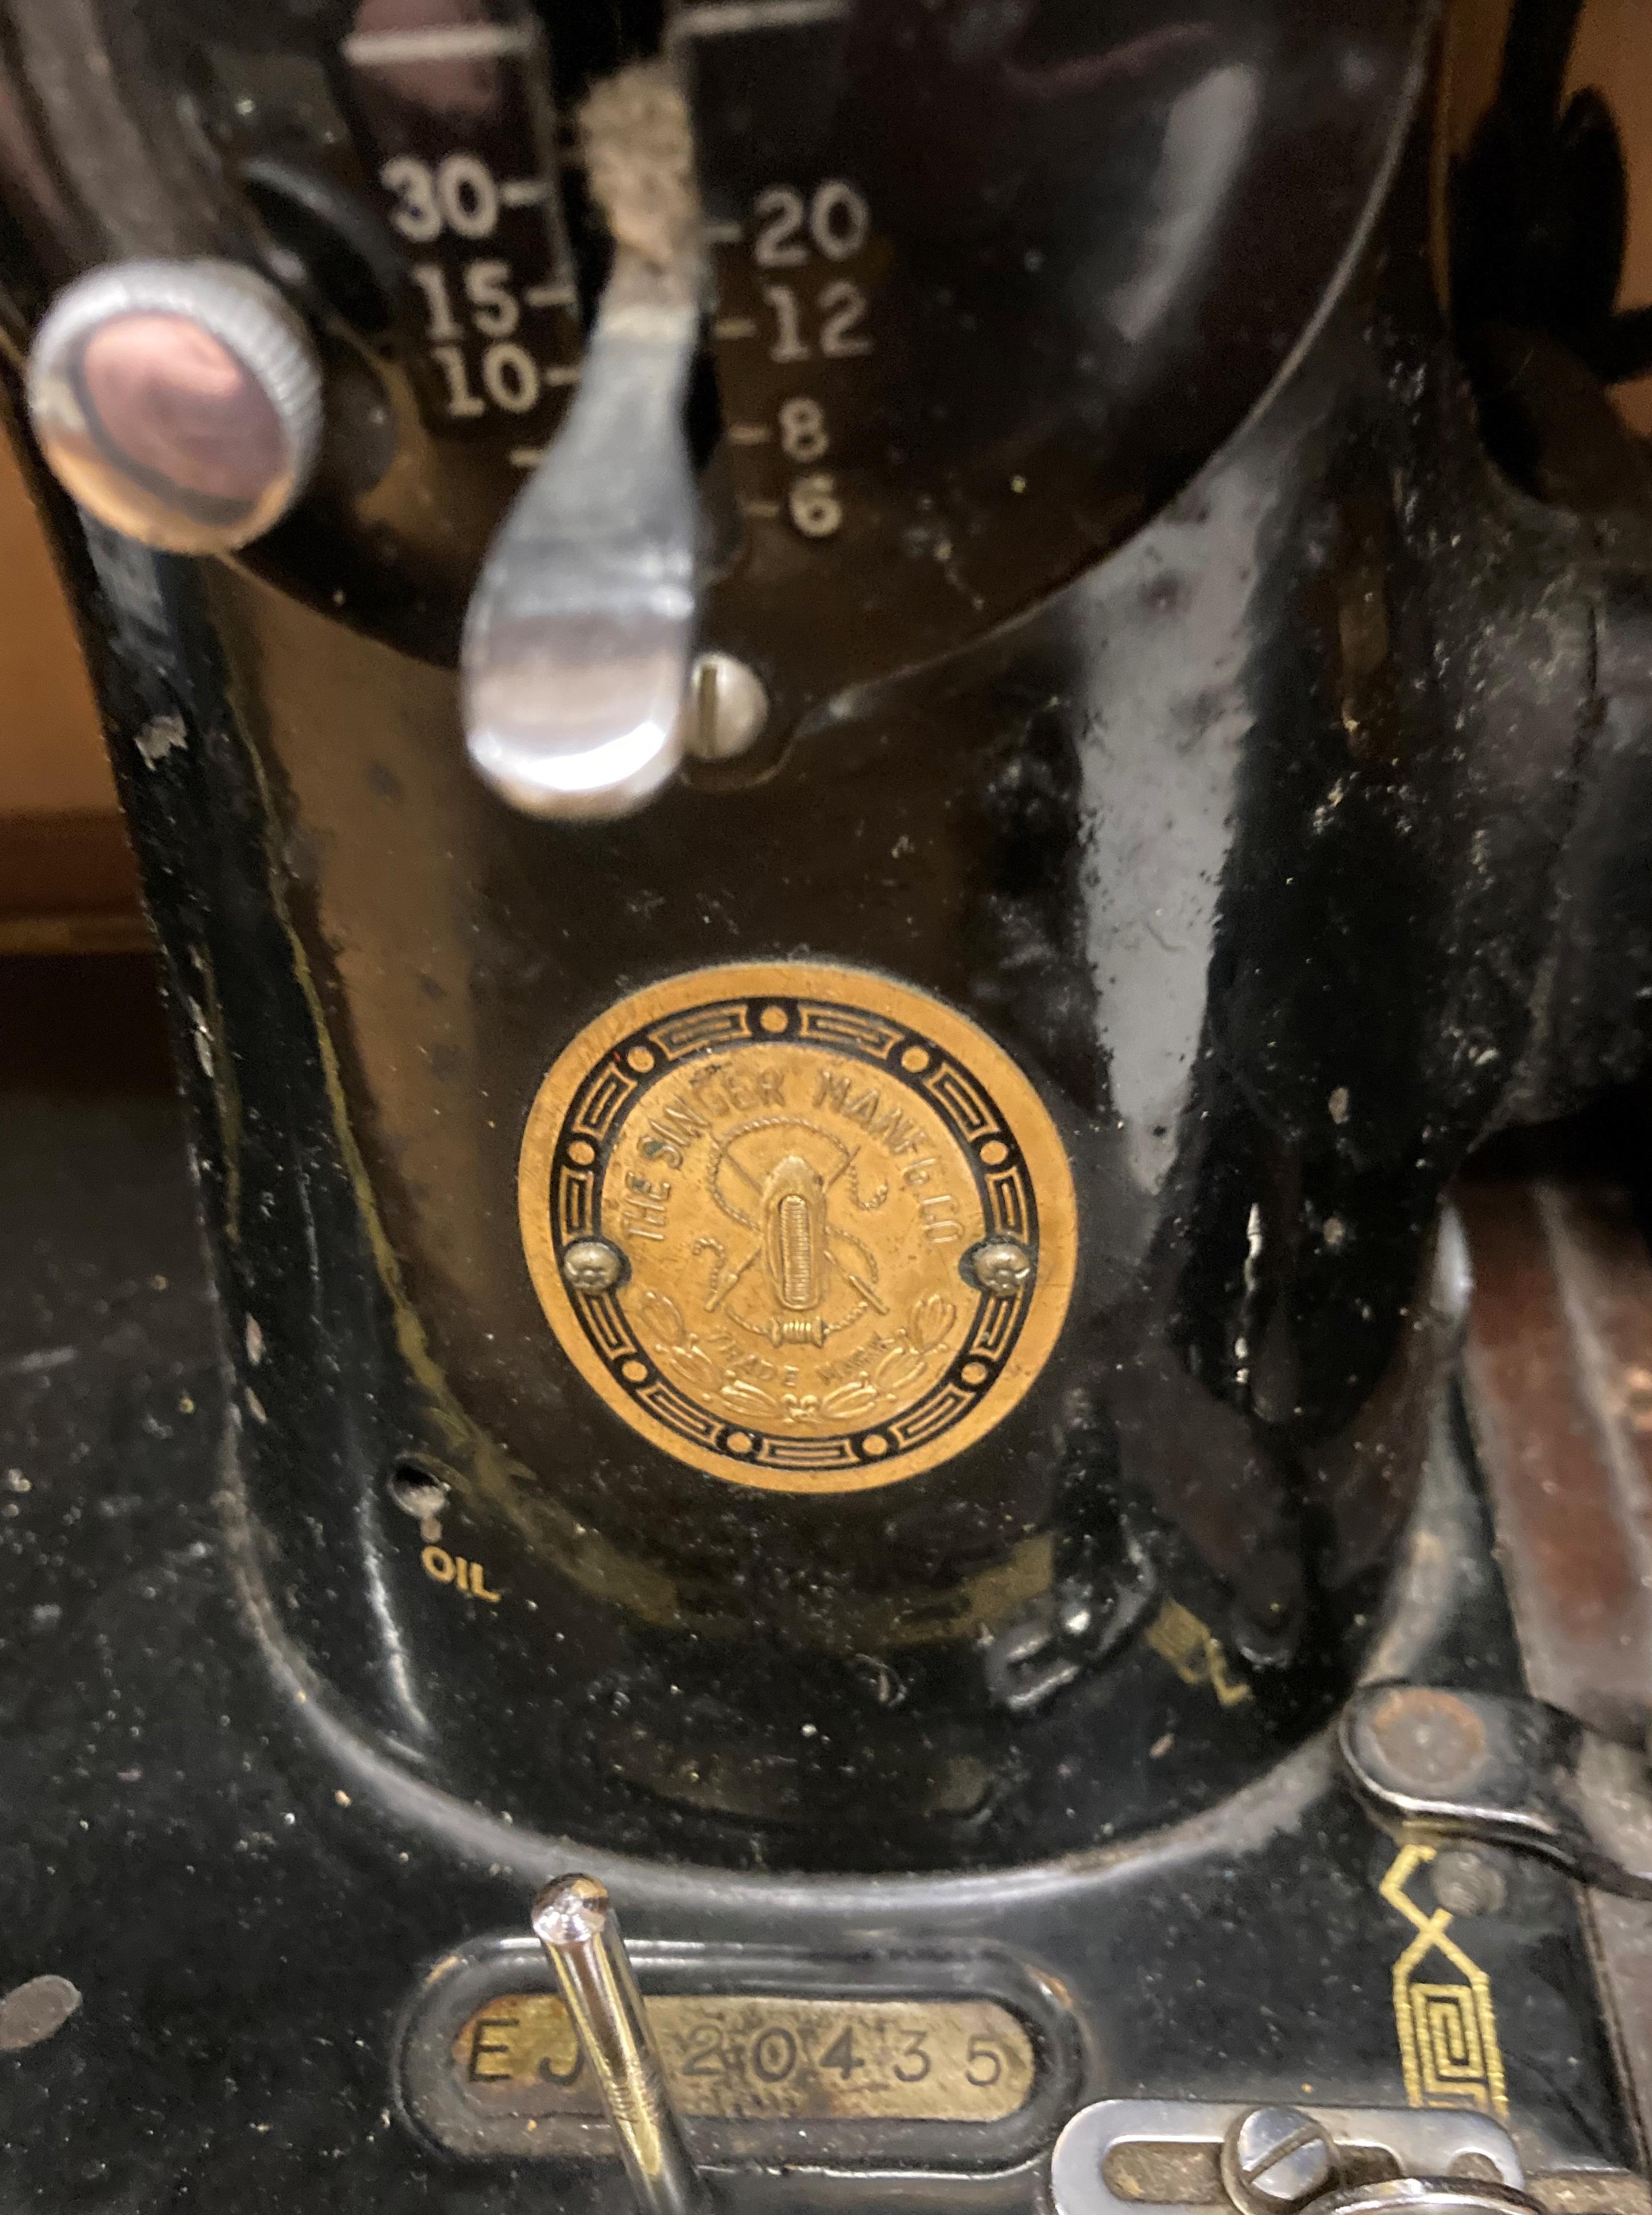 A Singer 240v sewing machine in carrying case, serial no. - Image 3 of 3